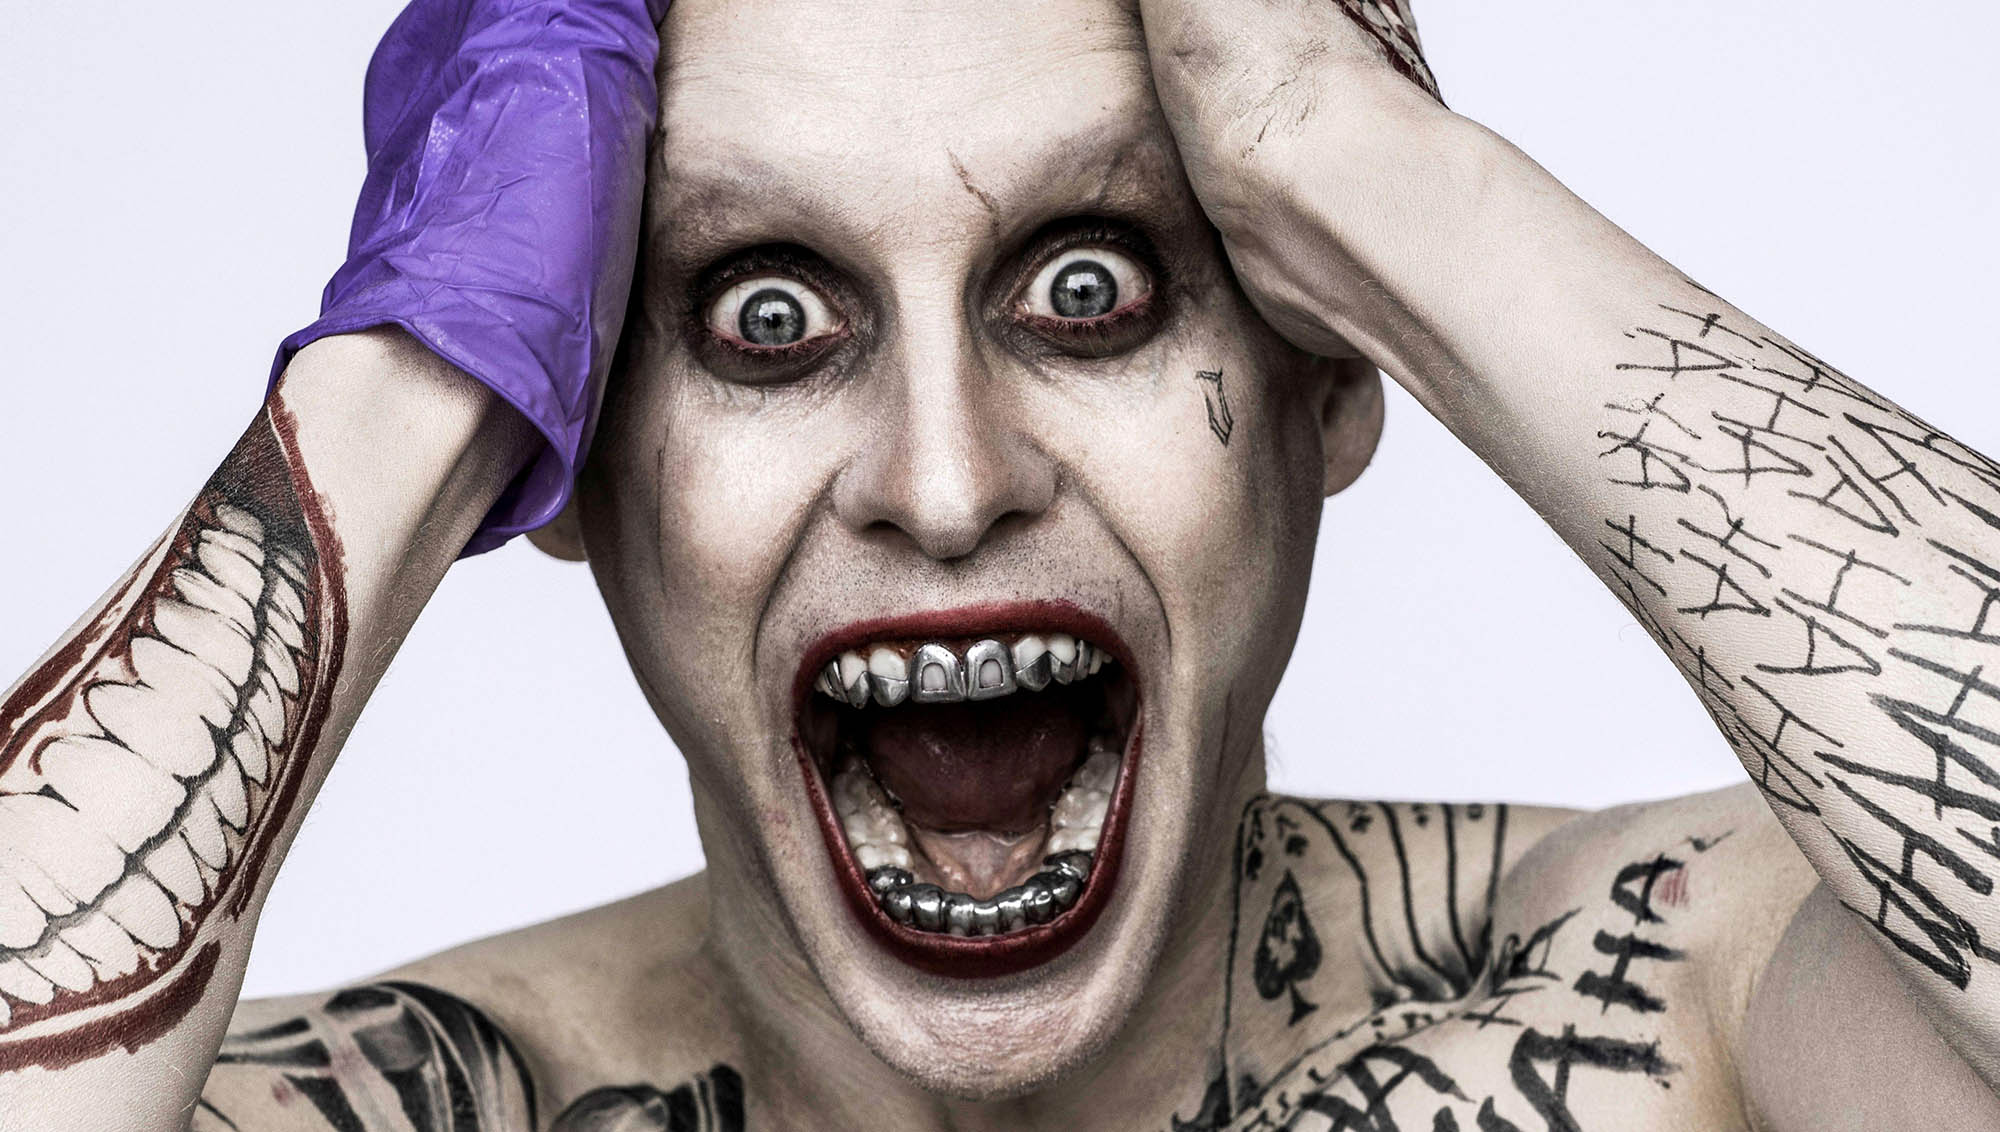 Let’s look back at some of Jared Leto's best roles to date (ranked from okay to mind-blowingly good). Was the Joker his best role?